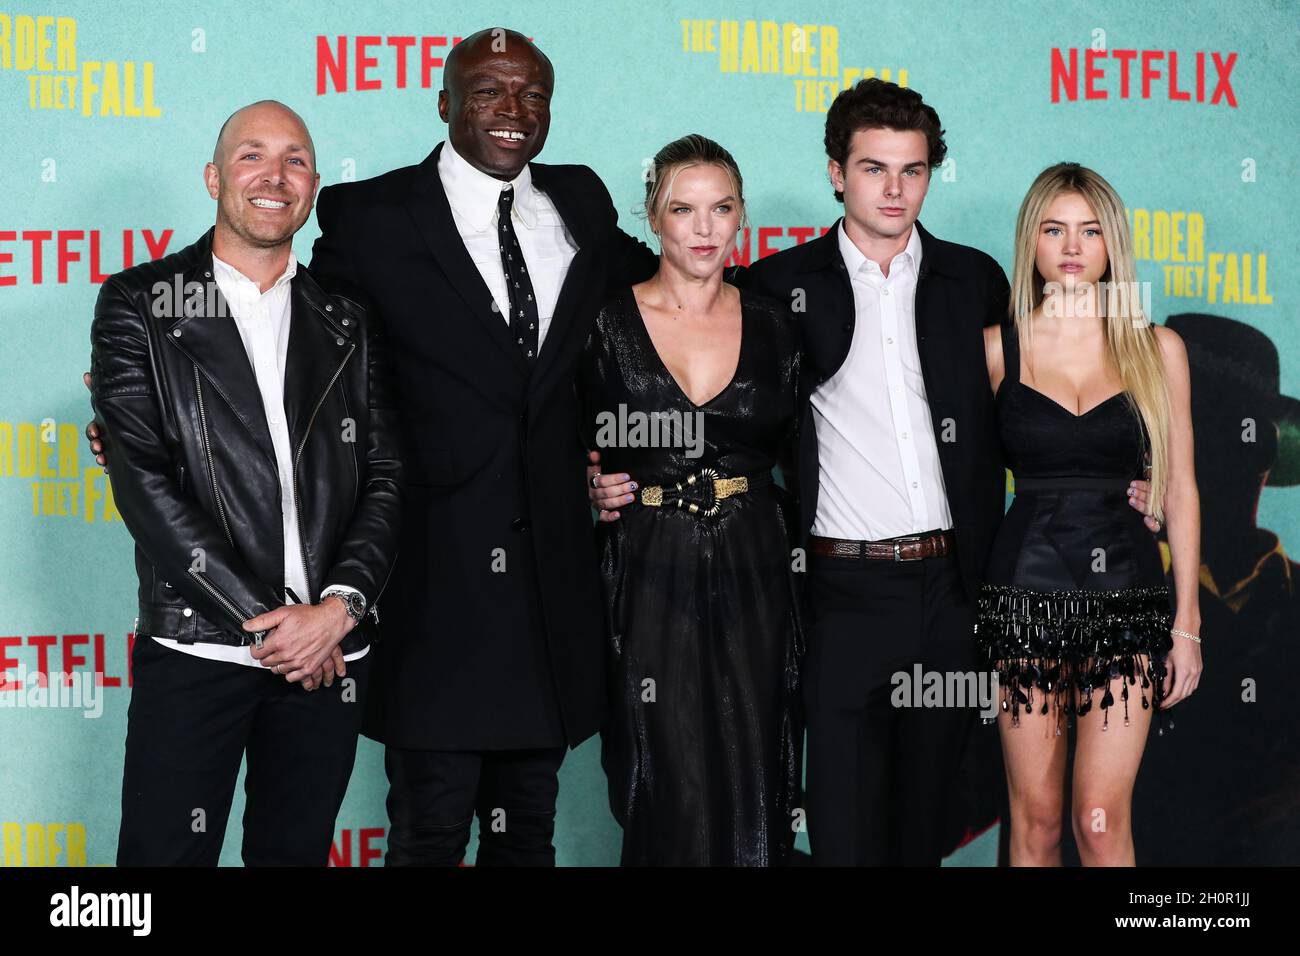 Los Angeles, United States. 13th Oct, 2021. LOS ANGELES, CALIFORNIA, USA - OCTOBER 13: Singer-songwriter Seal (Henry Olusegun Adeola Samuel), girlfriend Laura Strayer, Aris Rachevsky and model Leni Olumi Klum arrive at the Los Angeles Premiere Of Netflix's 'The Harder They Fall' held at the Shrine Auditorium and Expo Hall on October 13, 2021 in Los Angeles, California, United States. (Photo by Xavier Collin/Image Press Agency) Credit: Image Press Agency/Alamy Live News Stock Photo